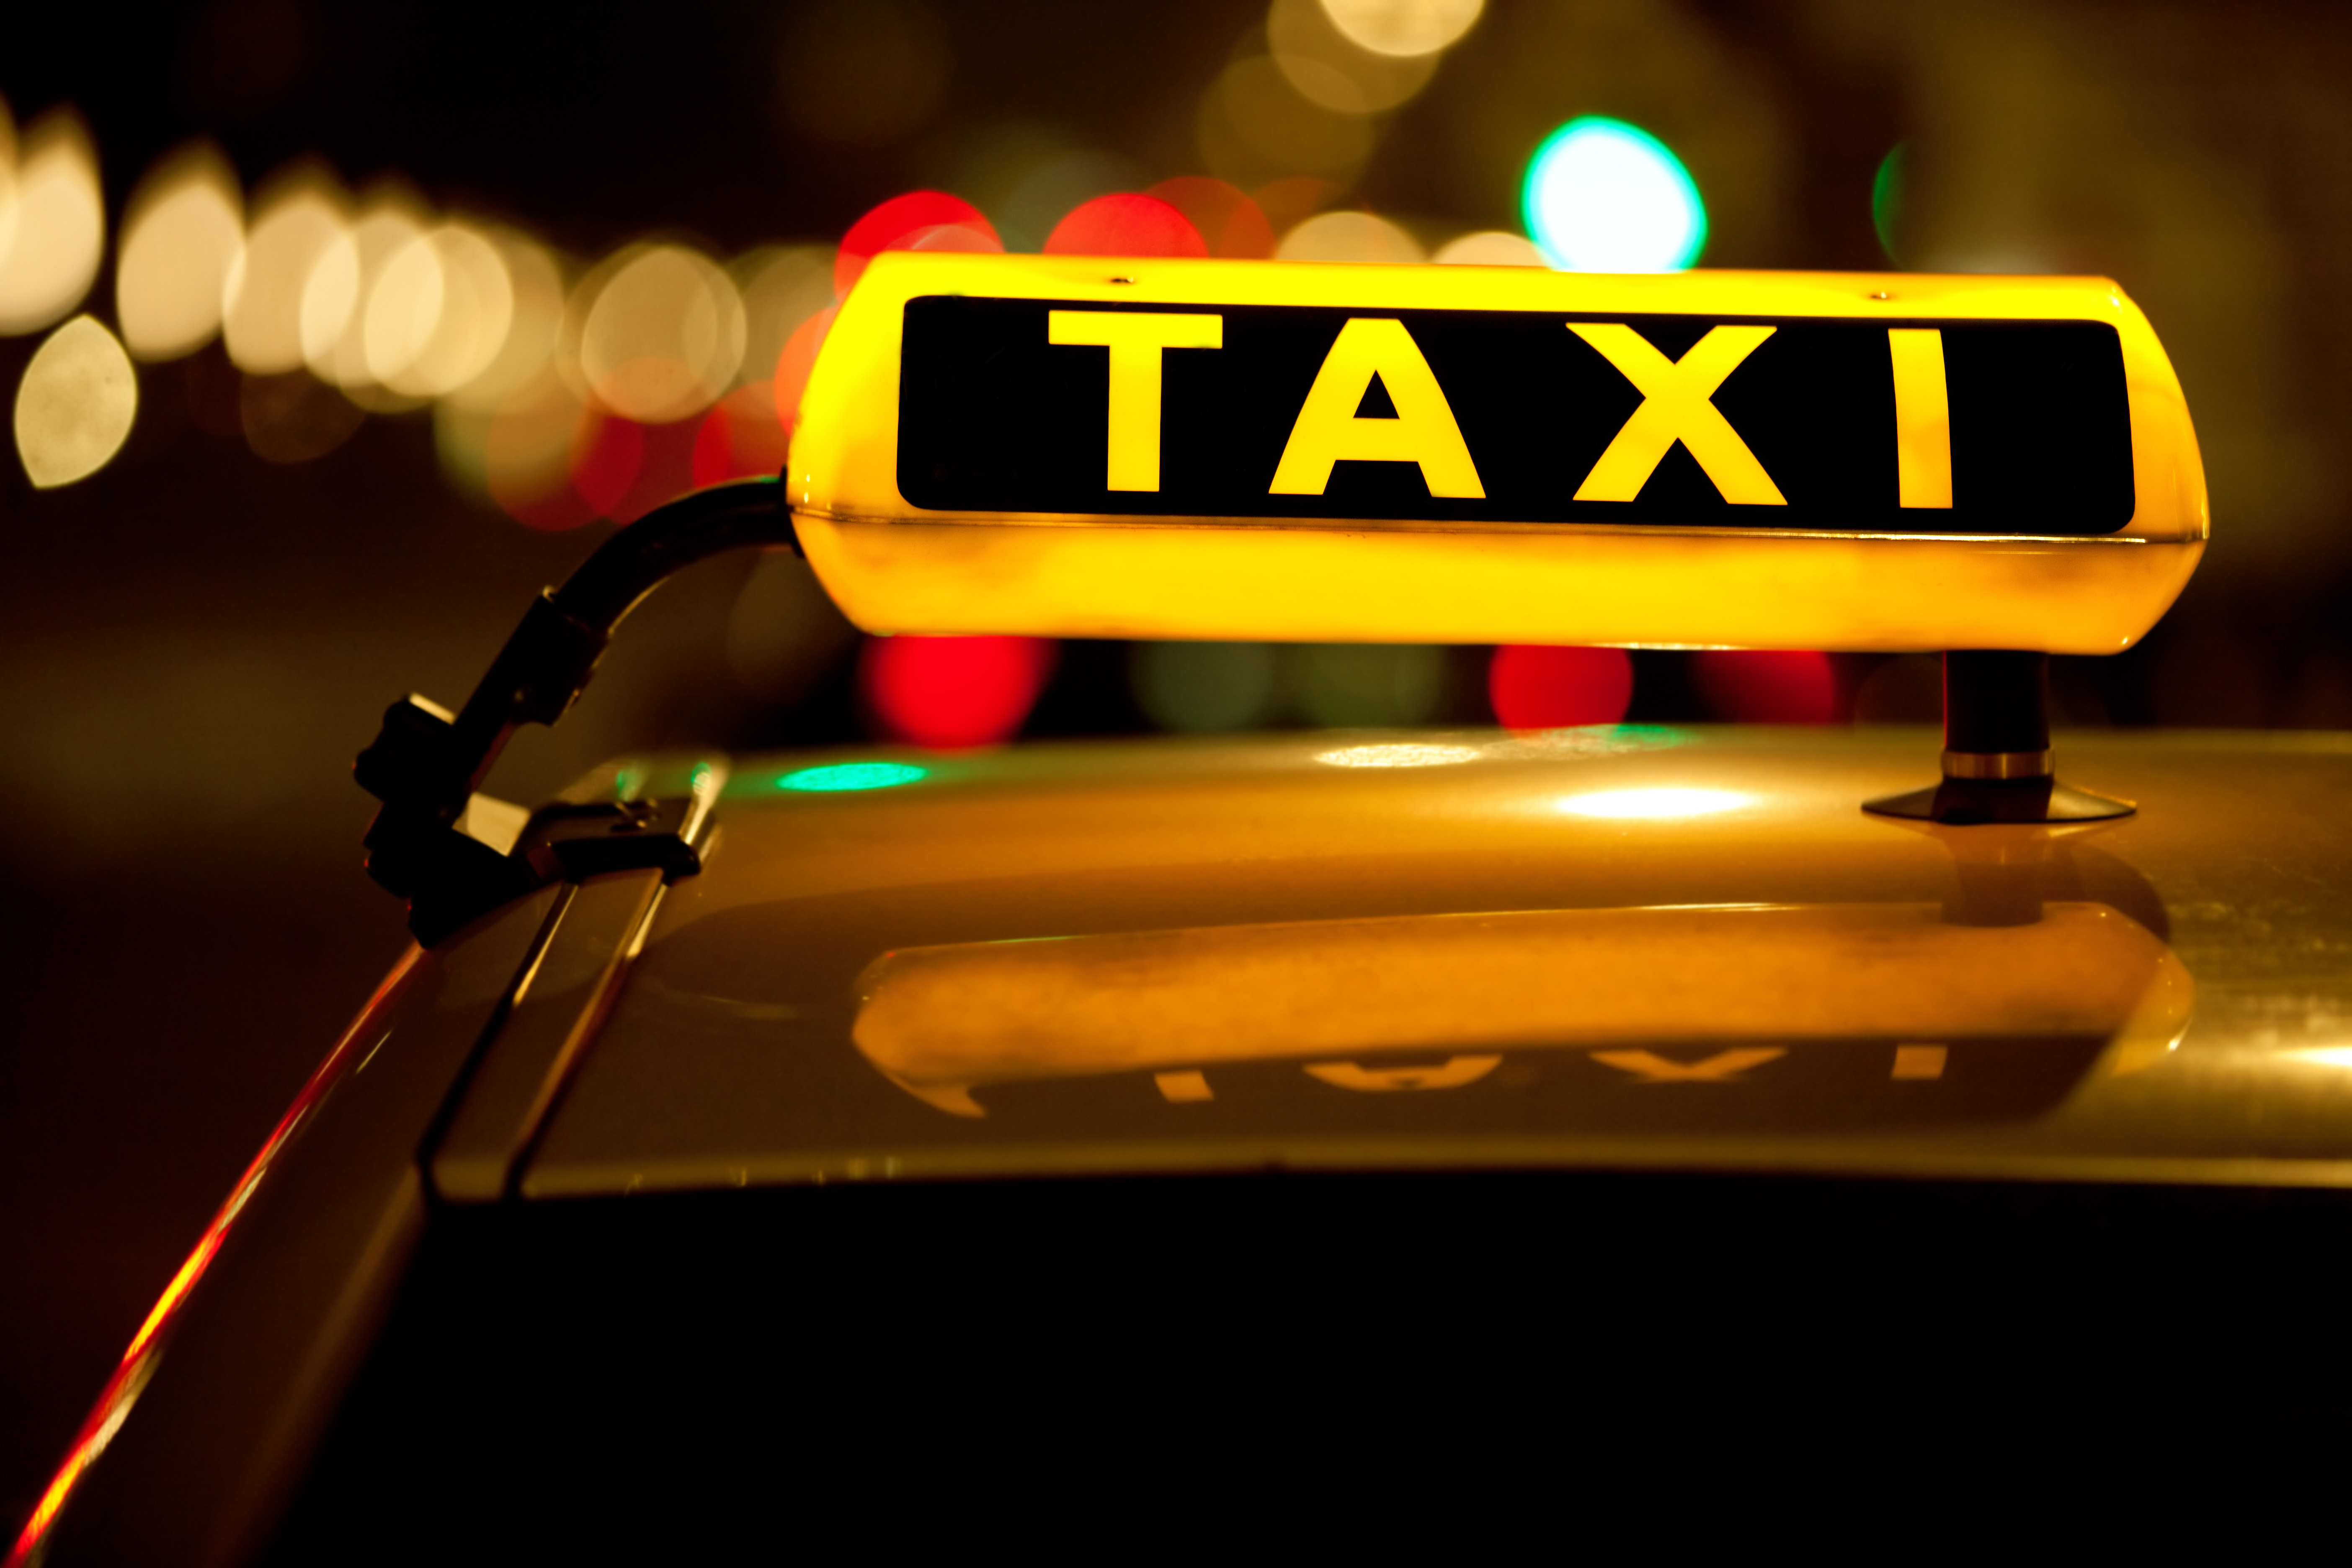 Taxi cab sign on top of the vehicle. | Source: Shutterstock